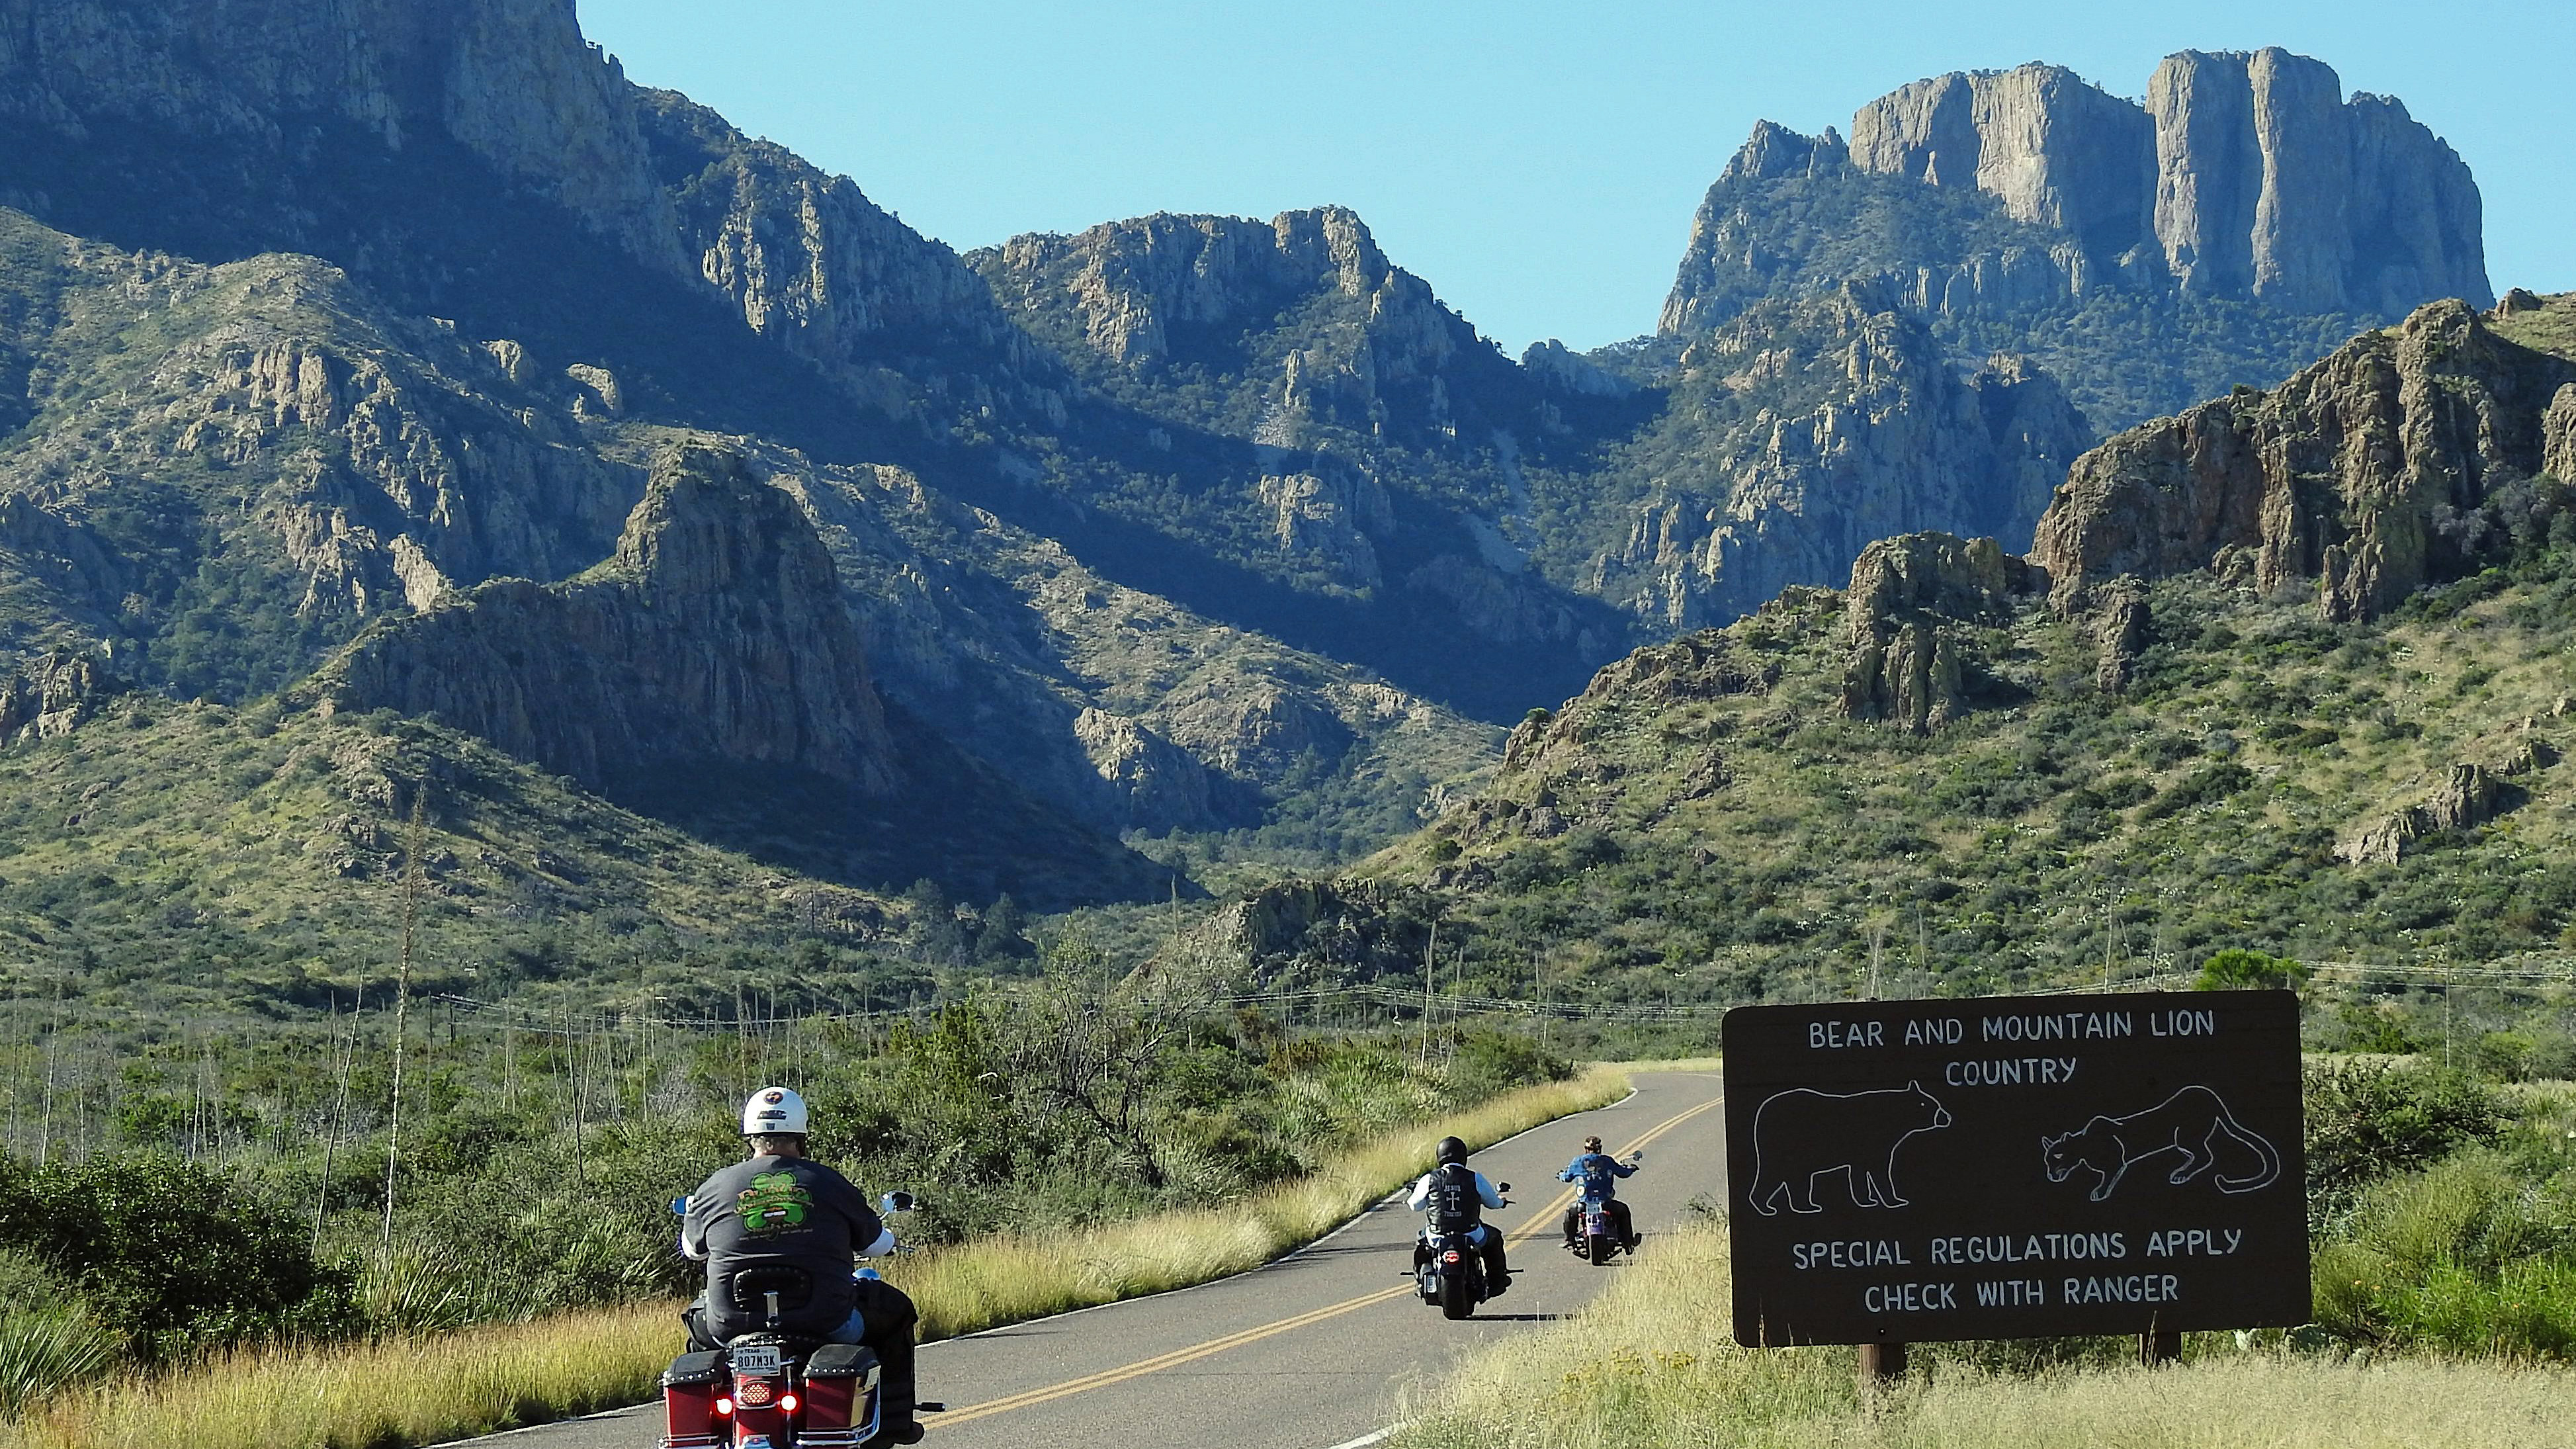 Three motorcycles are being ridden on a paved road into the mountains.